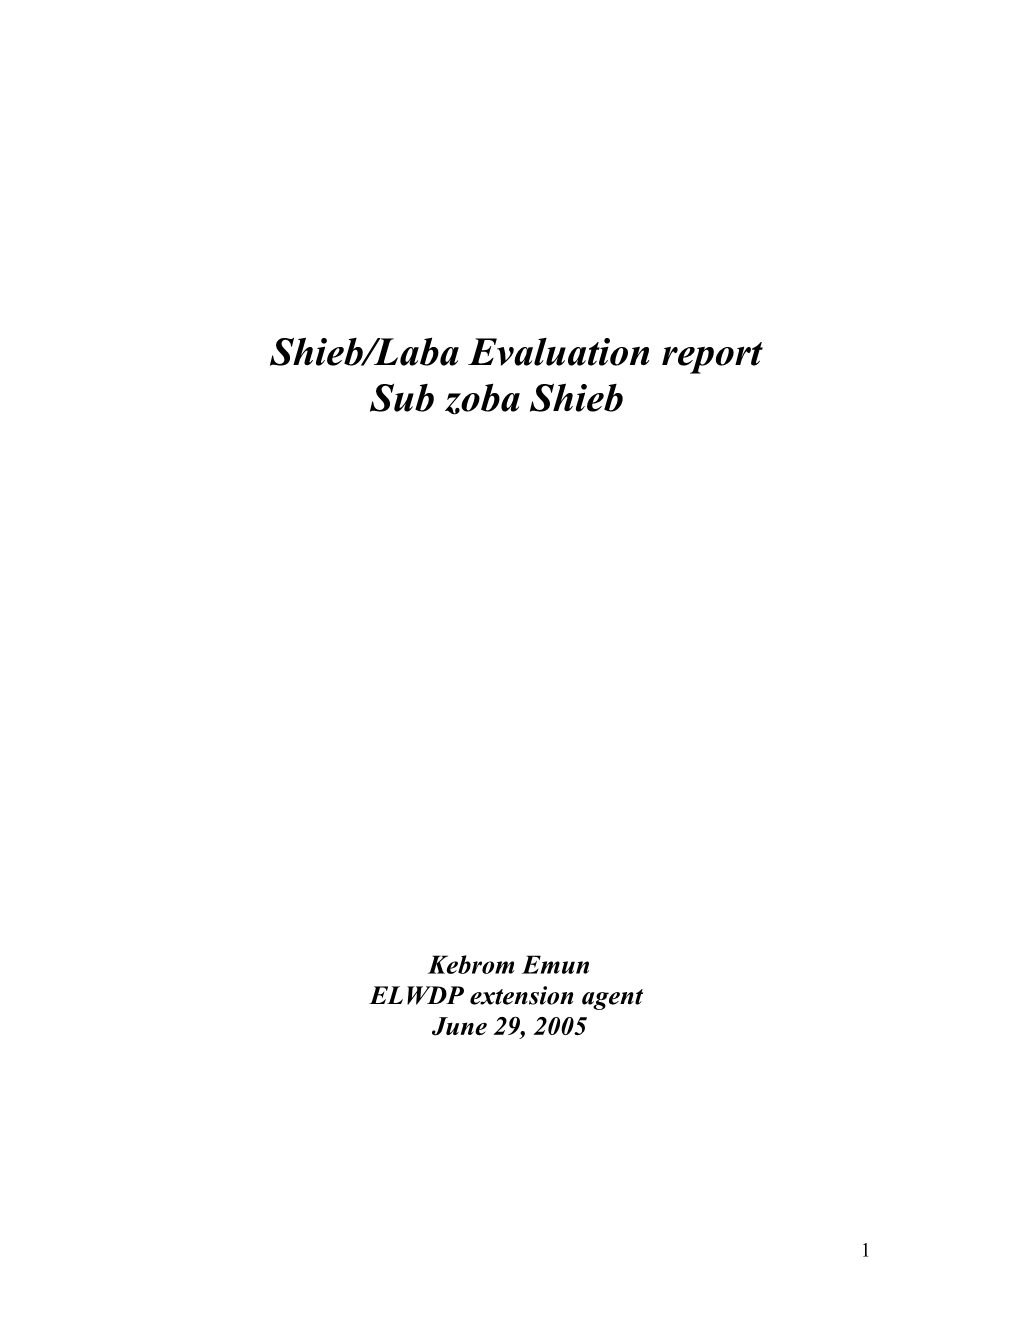 Summery Report on Evaluation of Shieb( Shagray) in Village Administrations- Wekiro, Shieb